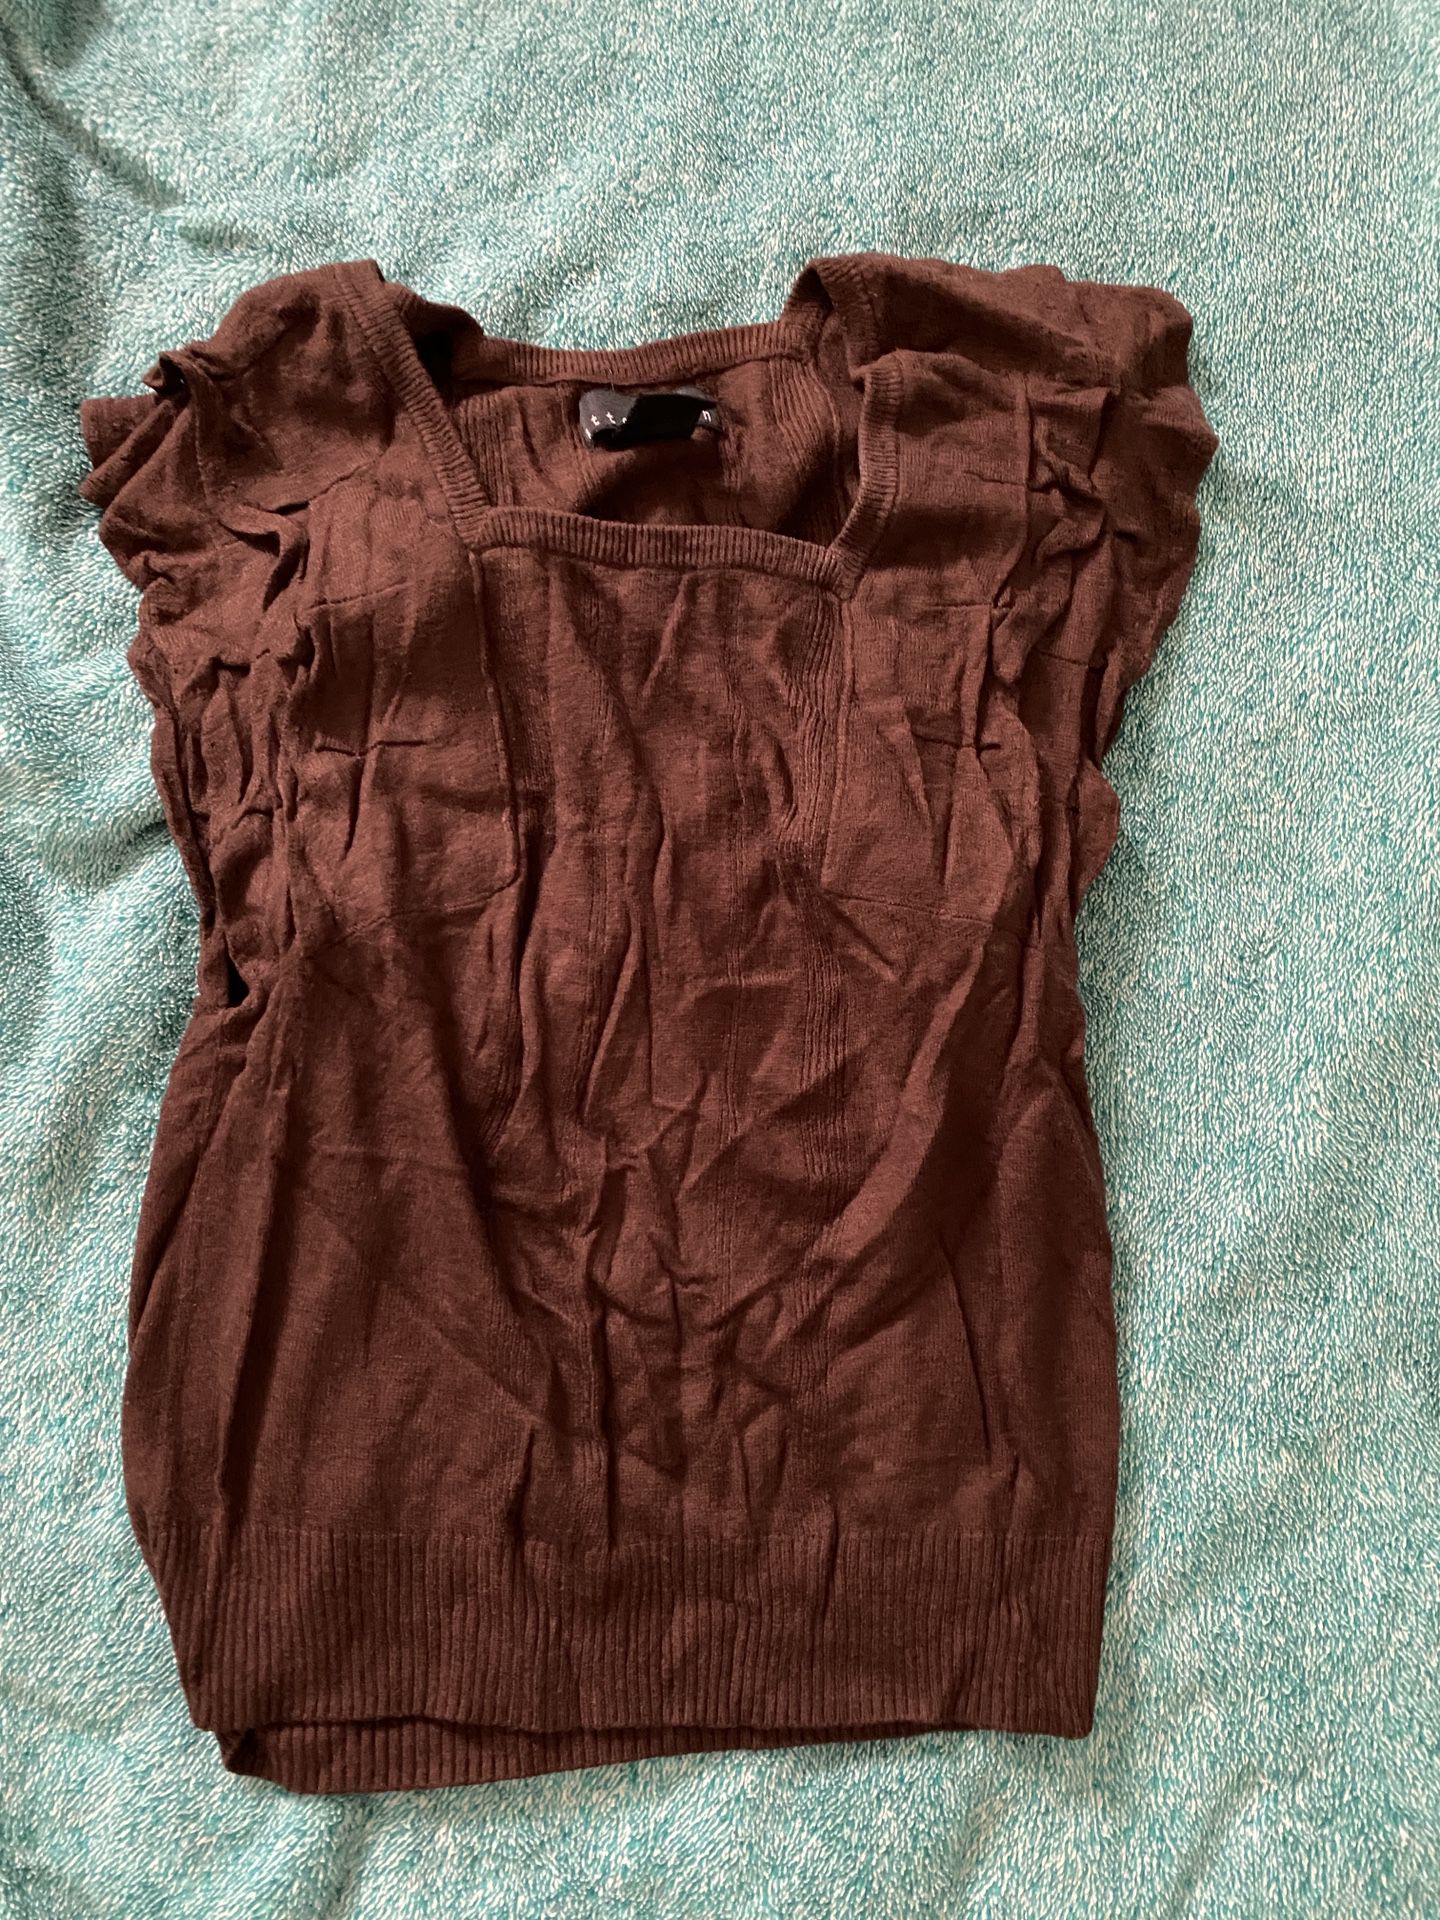 Attention Brown Sweater Vest - Women’s Small